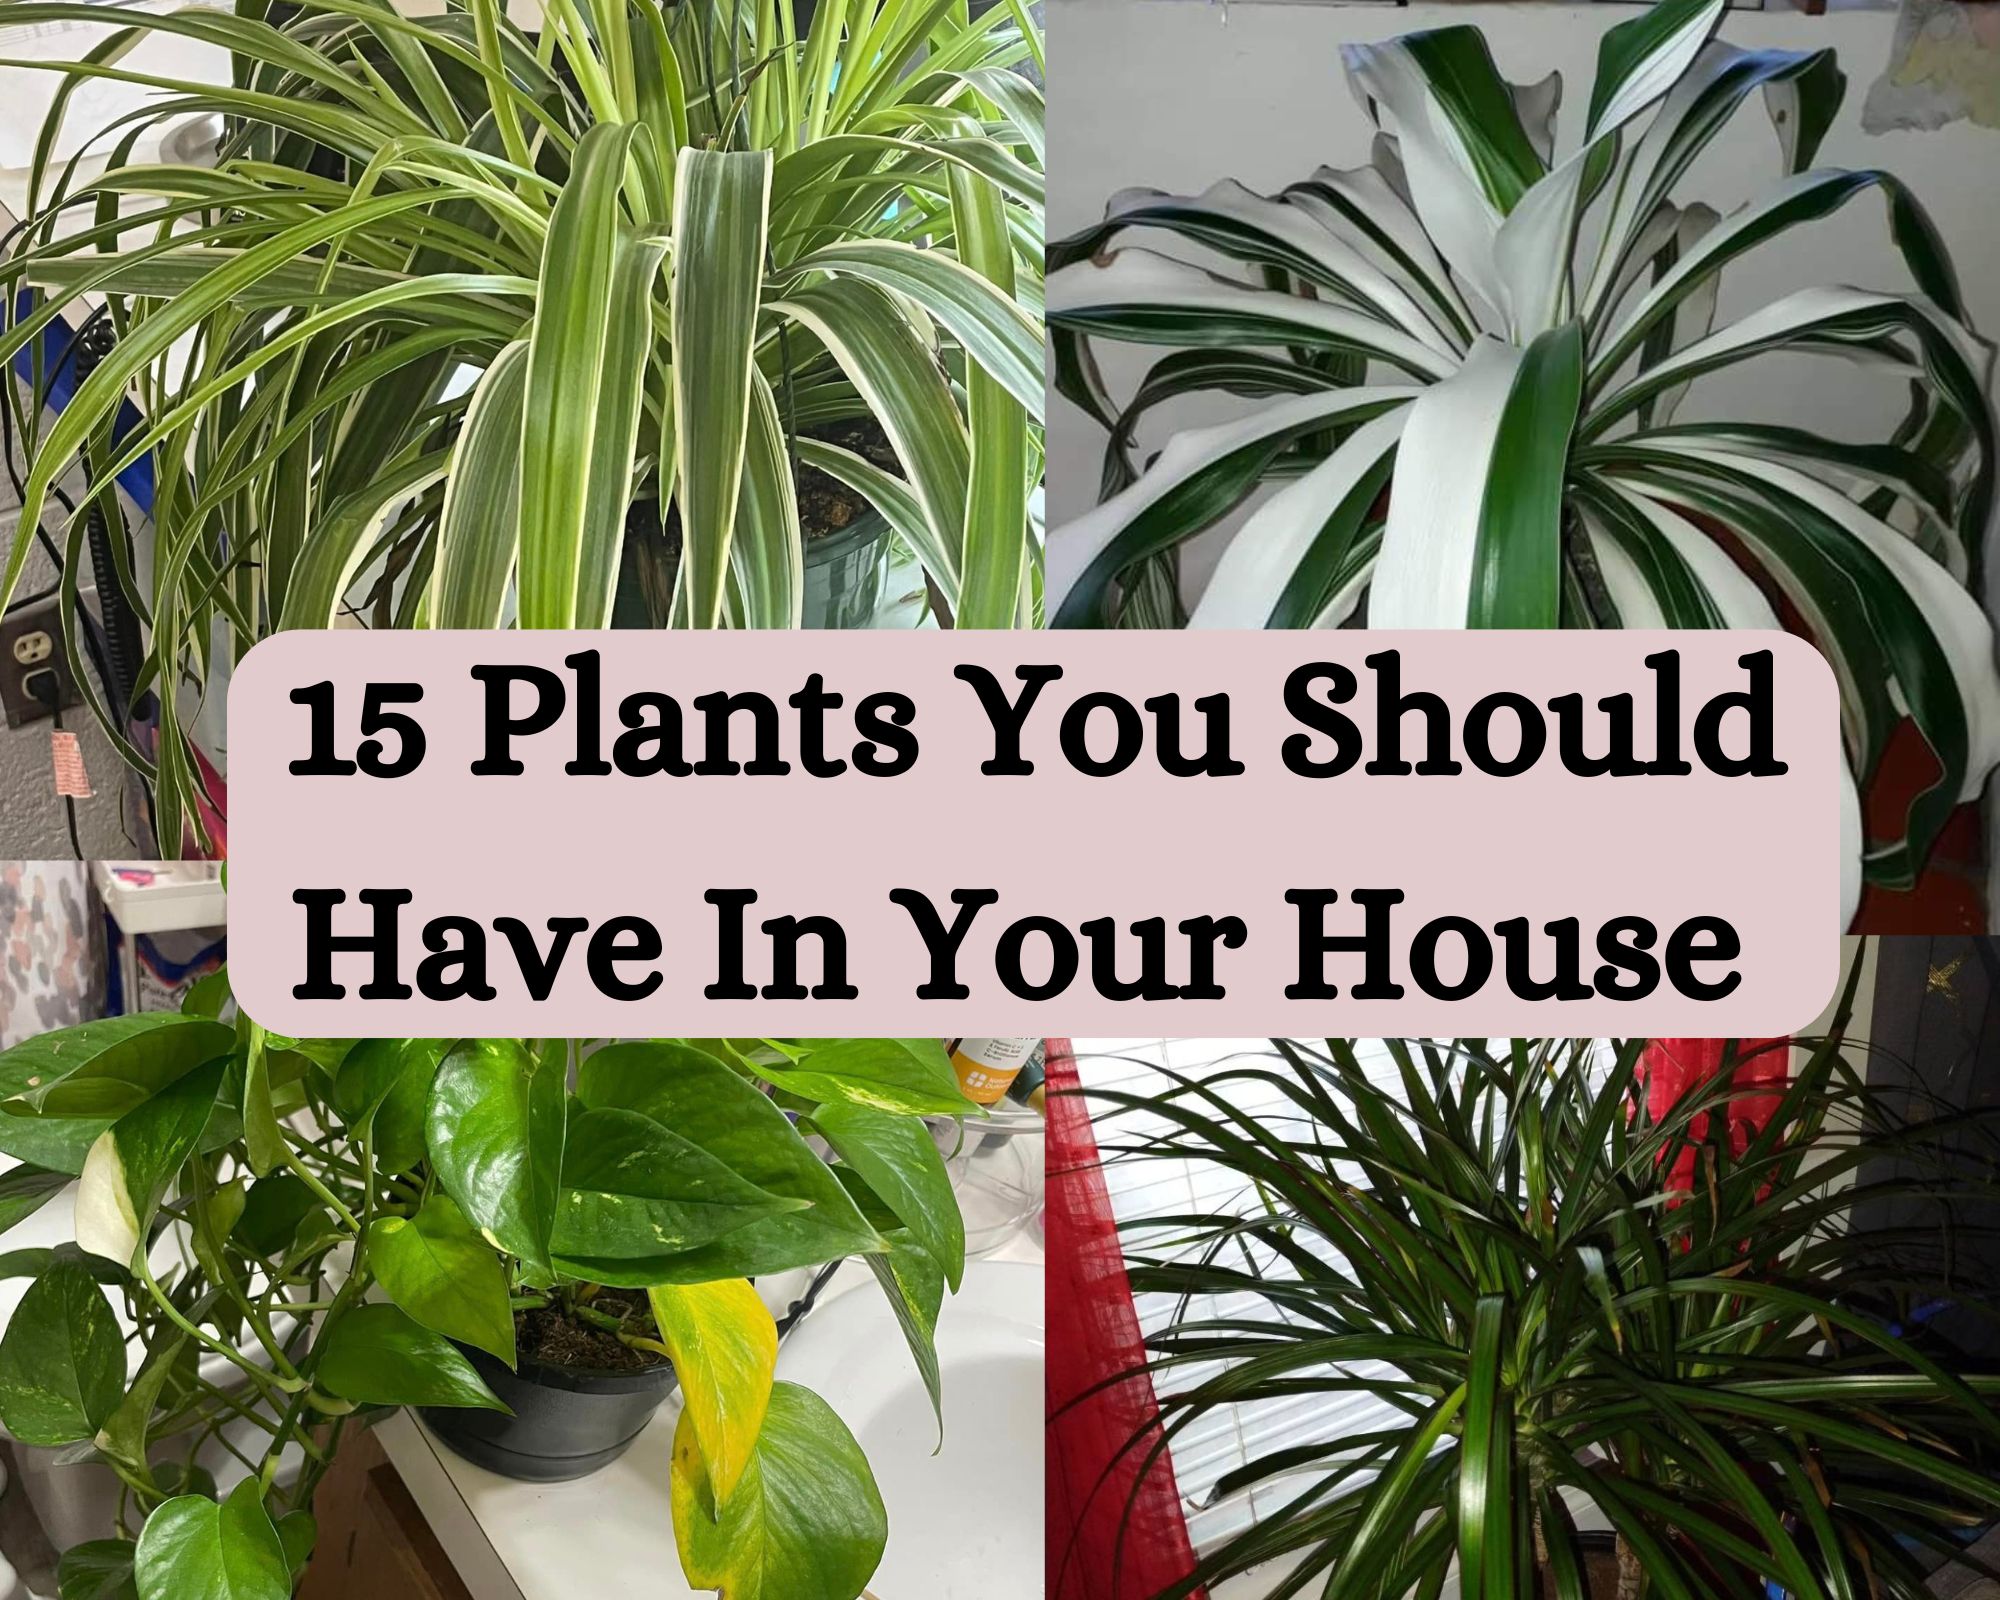 Plants You Should Have In Your House